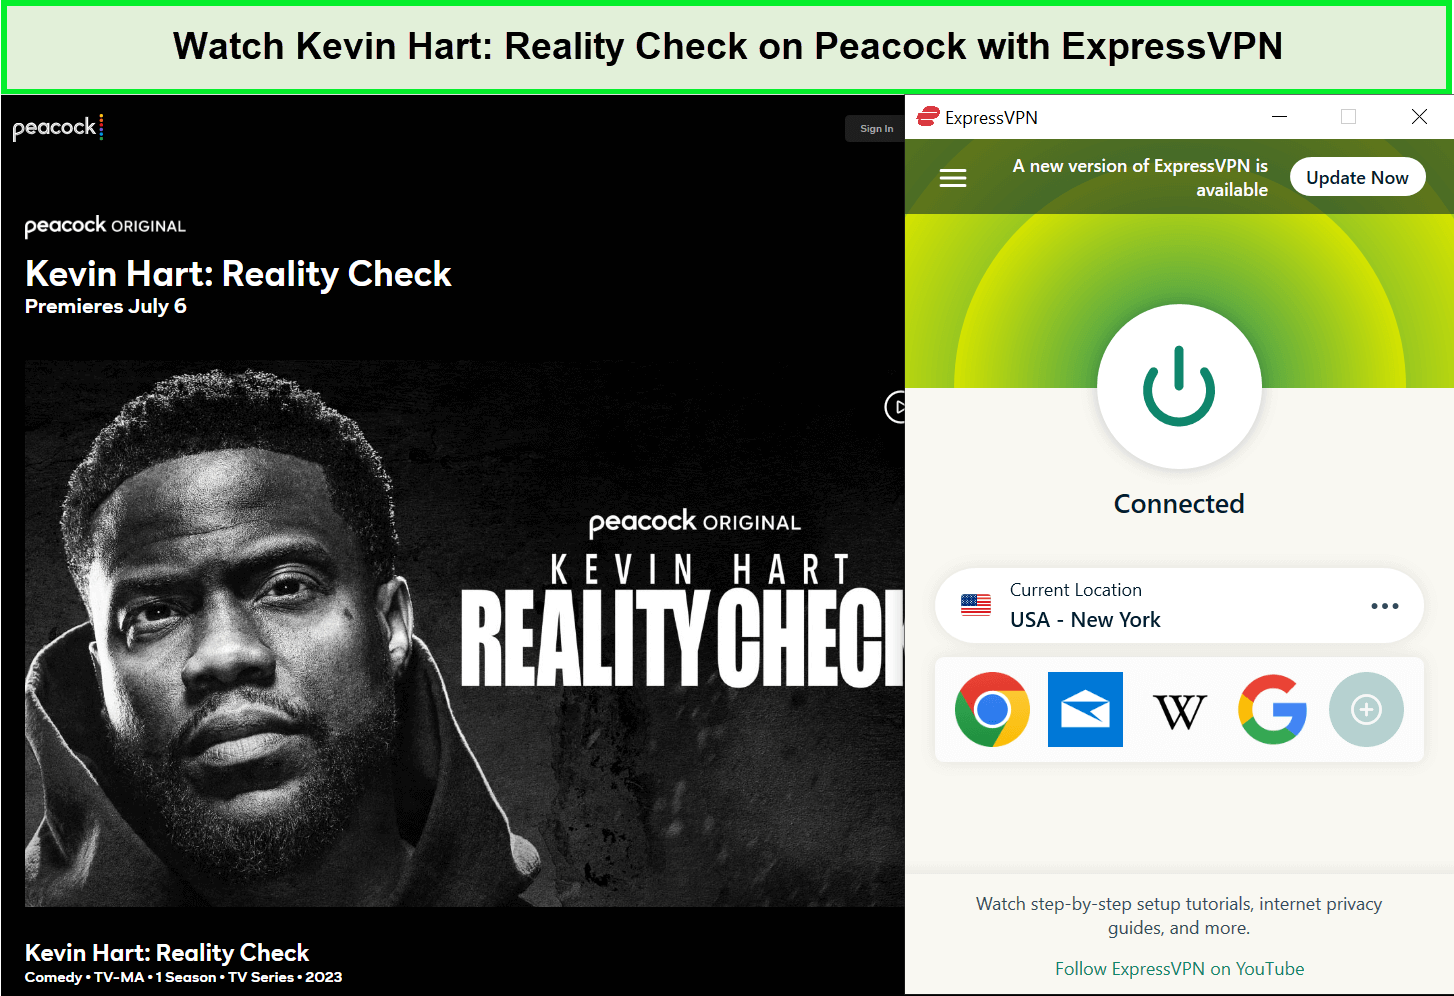 Watch-Kevin-Hart-Reality-Check-in-Germany-on-Peacock-with-ExpressVPN